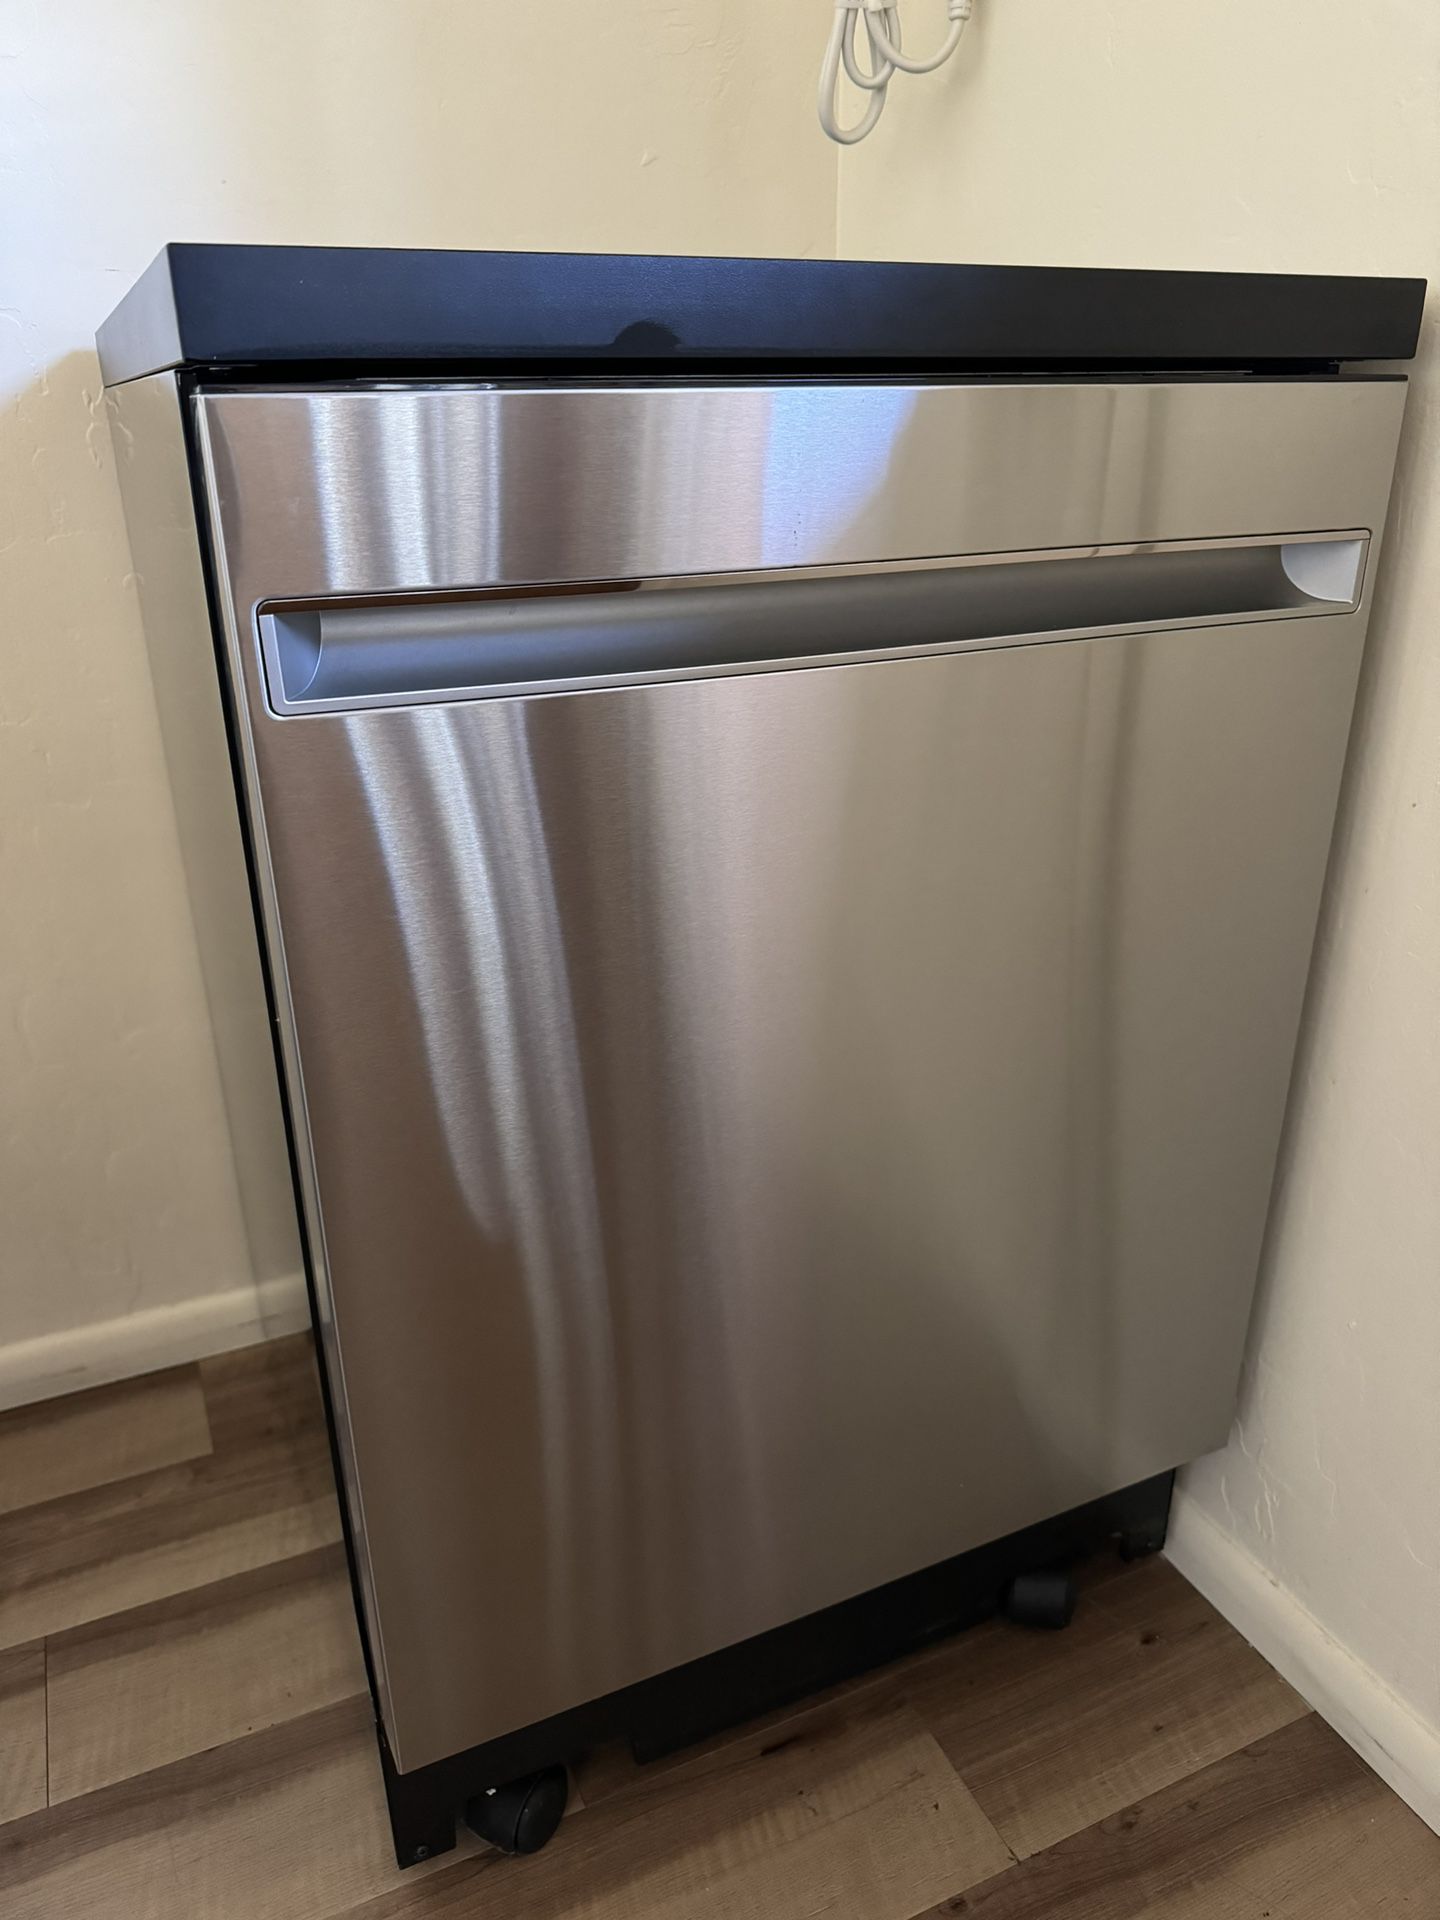 GE 24" Portable Dishwasher - stainless steel